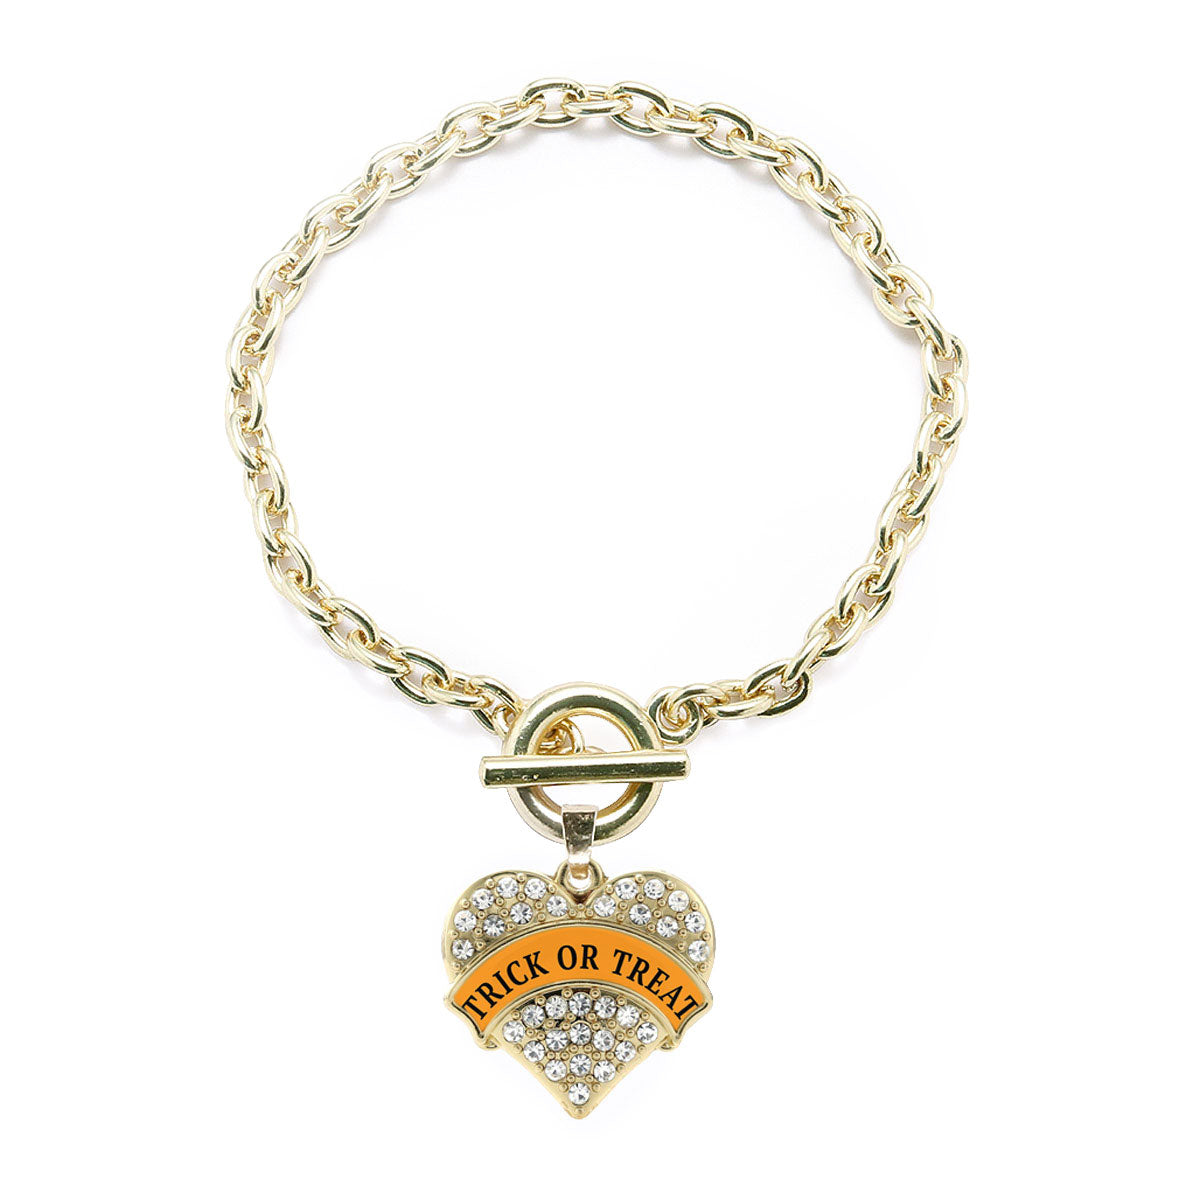 Gold Trick or Treat Pave Heart Charm Toggle Bracelet